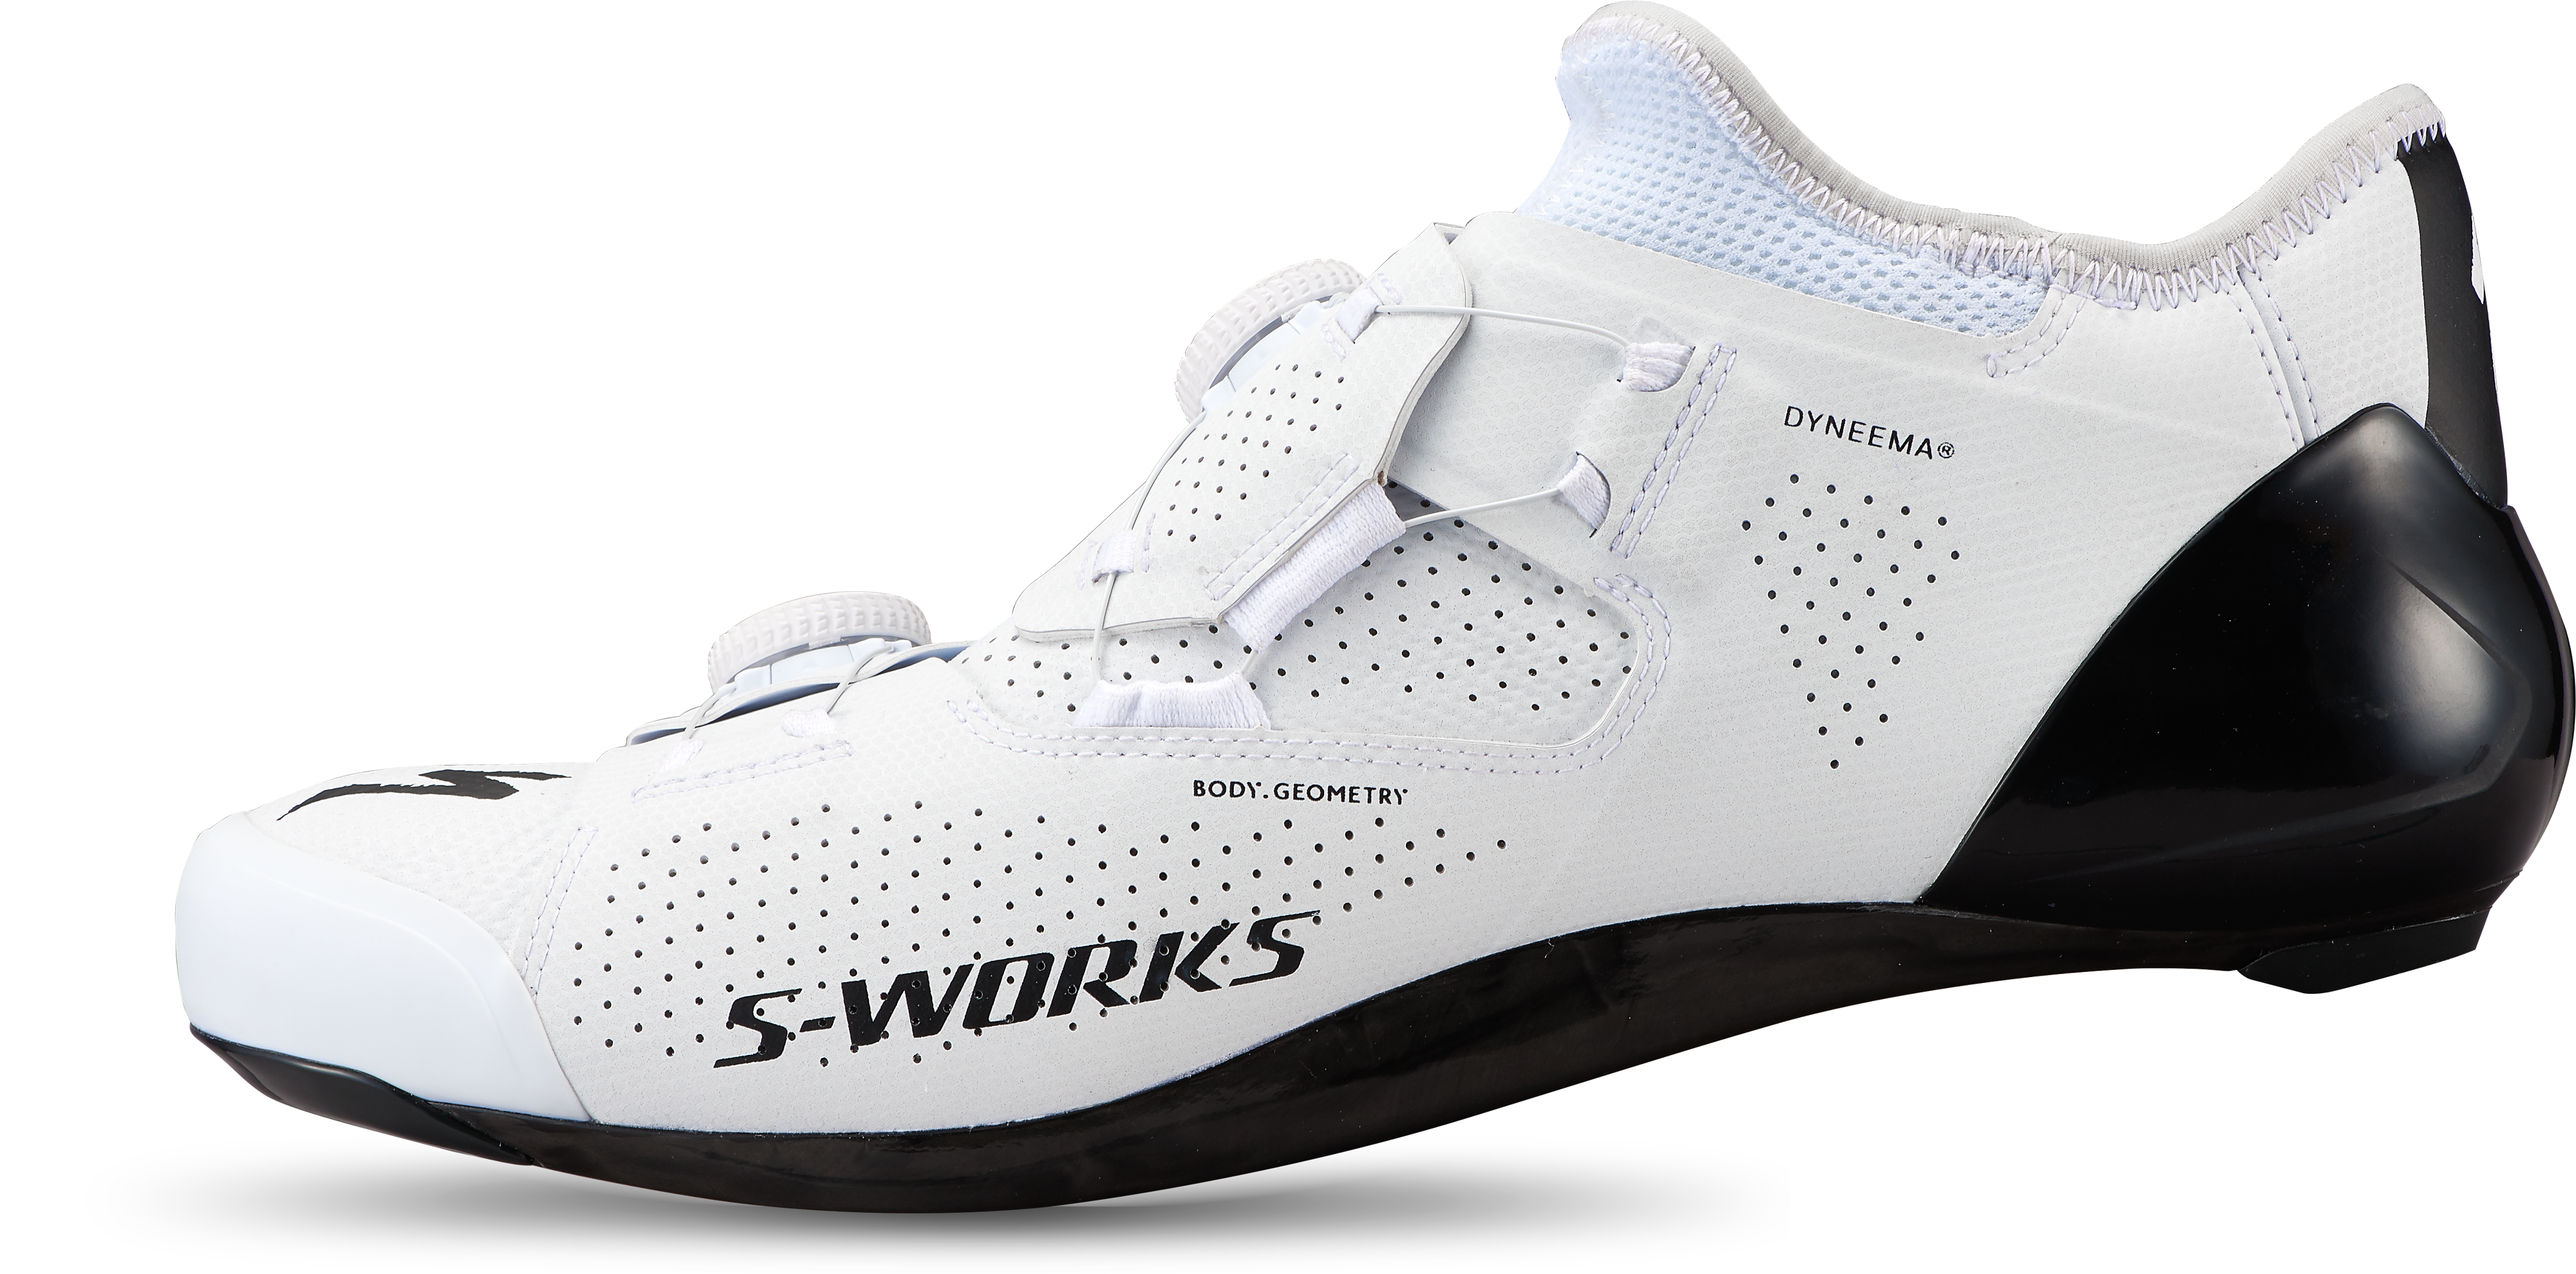 S-WORKS ARES SHOES size 40